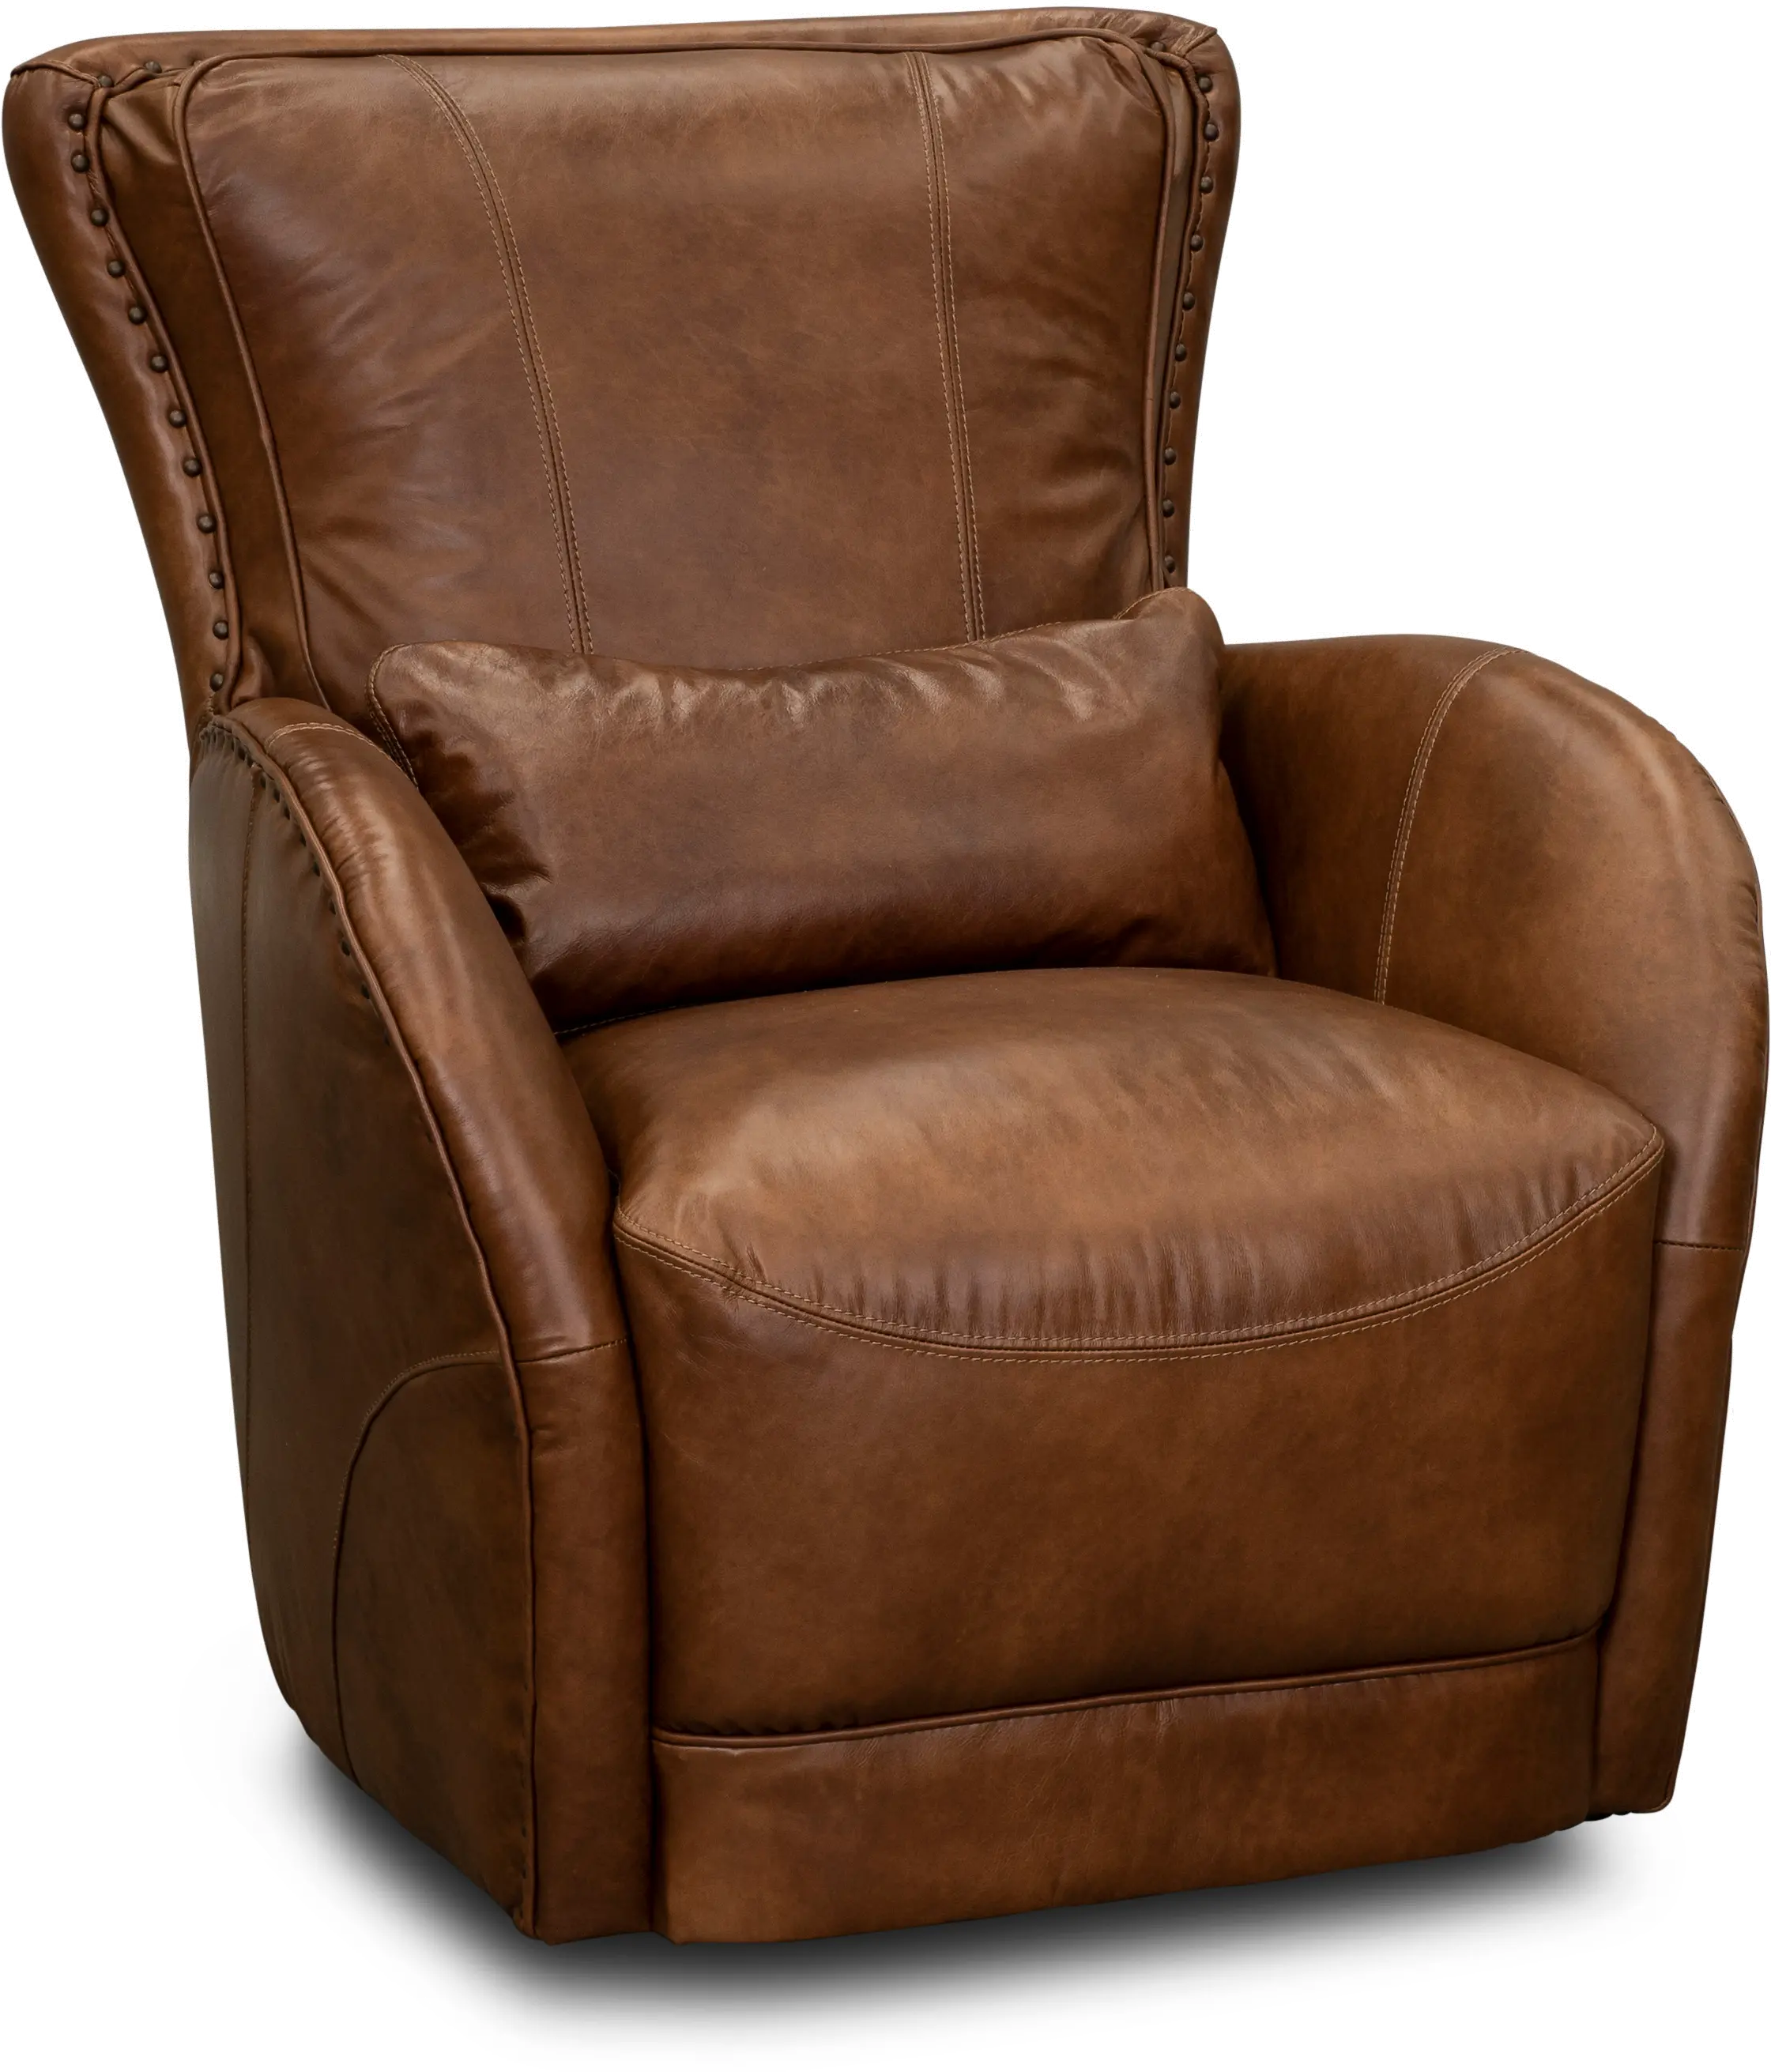 St. James Brown Leather Swivel Chair